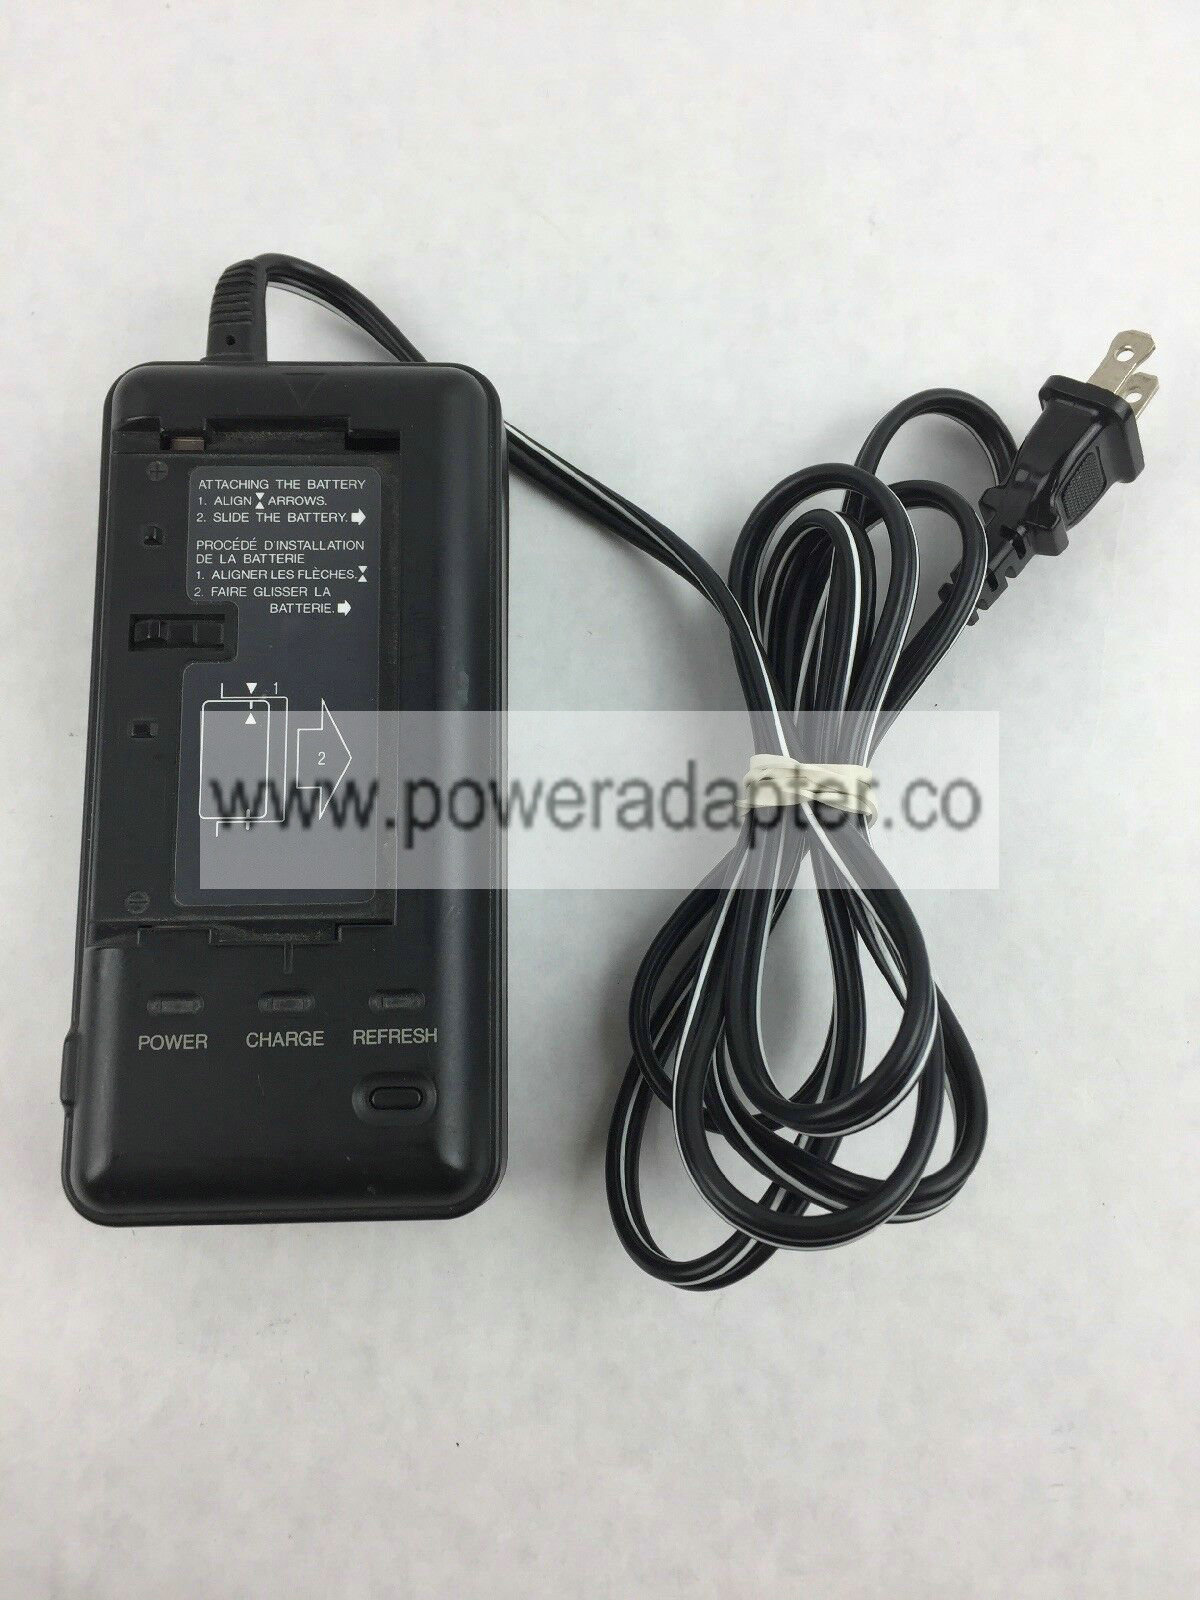 Thomson Model 221361 120v AC Adapter Charger Input AC100-240V 50/60Hz 20W Model no: 221361 adapter mode:6v 2a charger